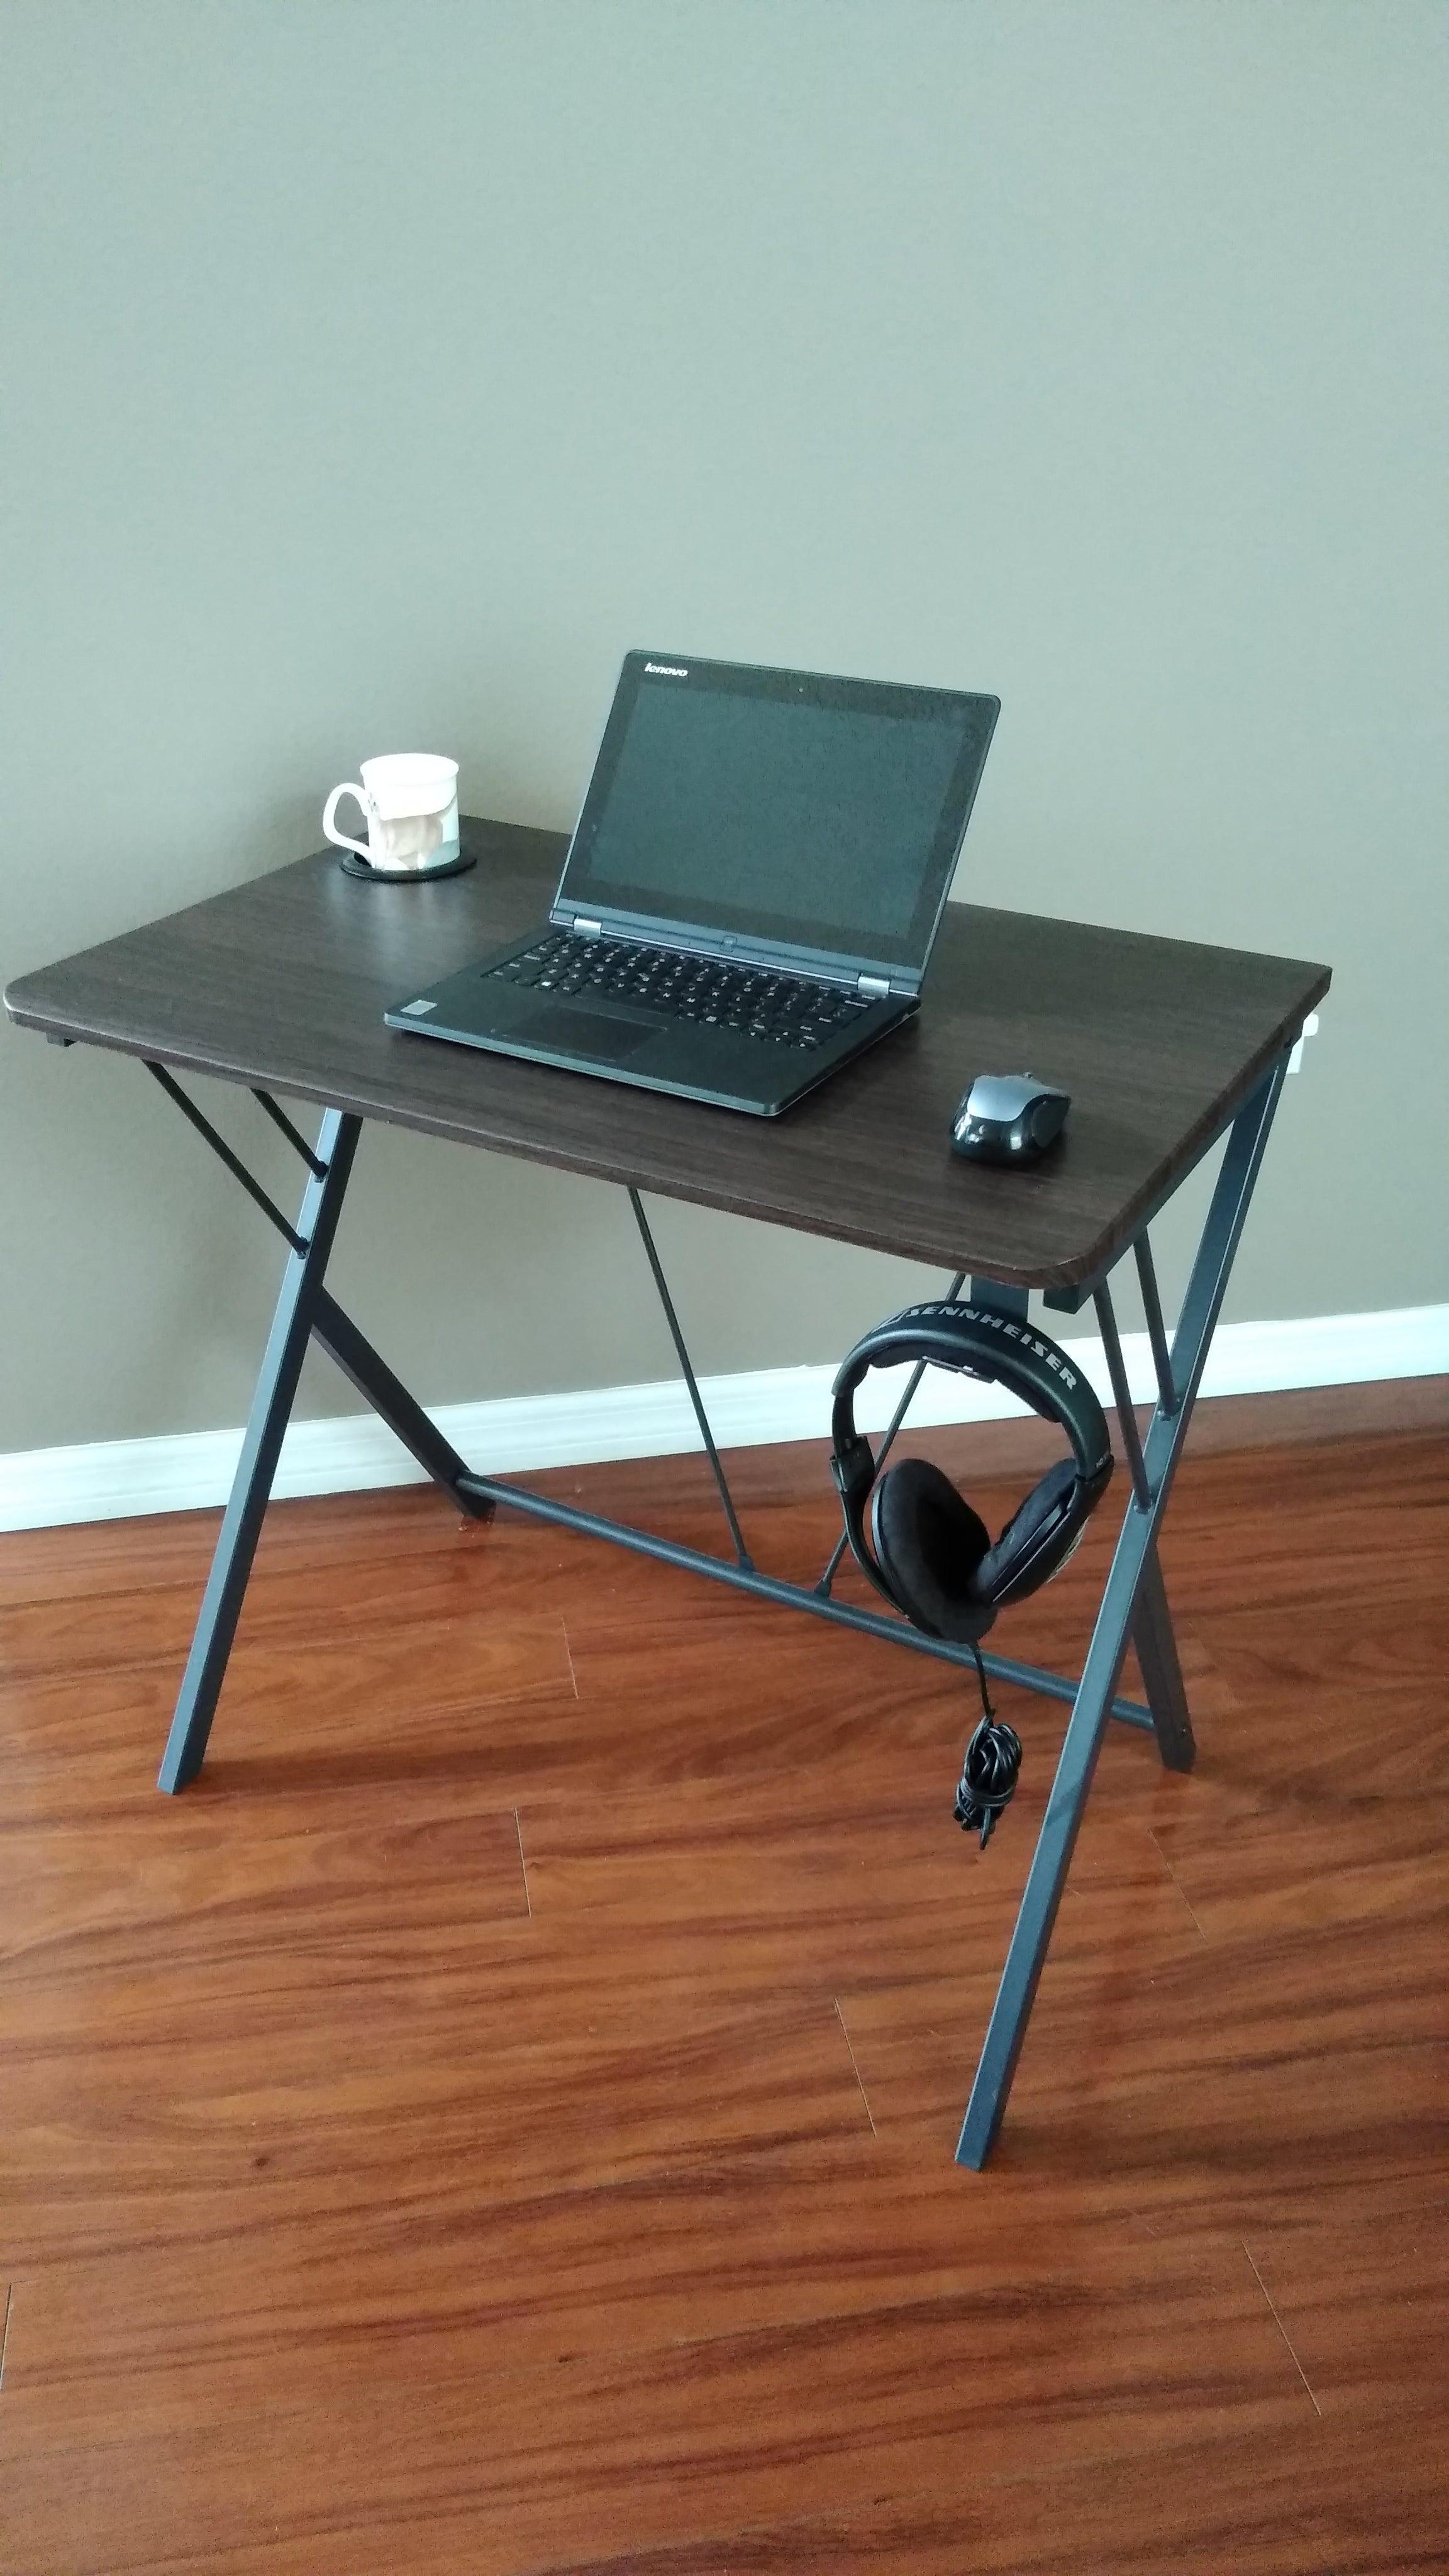 https://cdn.shopify.com/s/files/1/0683/1931/products/sw32l-32-w-compact-computer-desk-with-headphone-backpack-hook-and-cup-holder-dark-walnut-computer-desk-7.jpg?v=1658410478